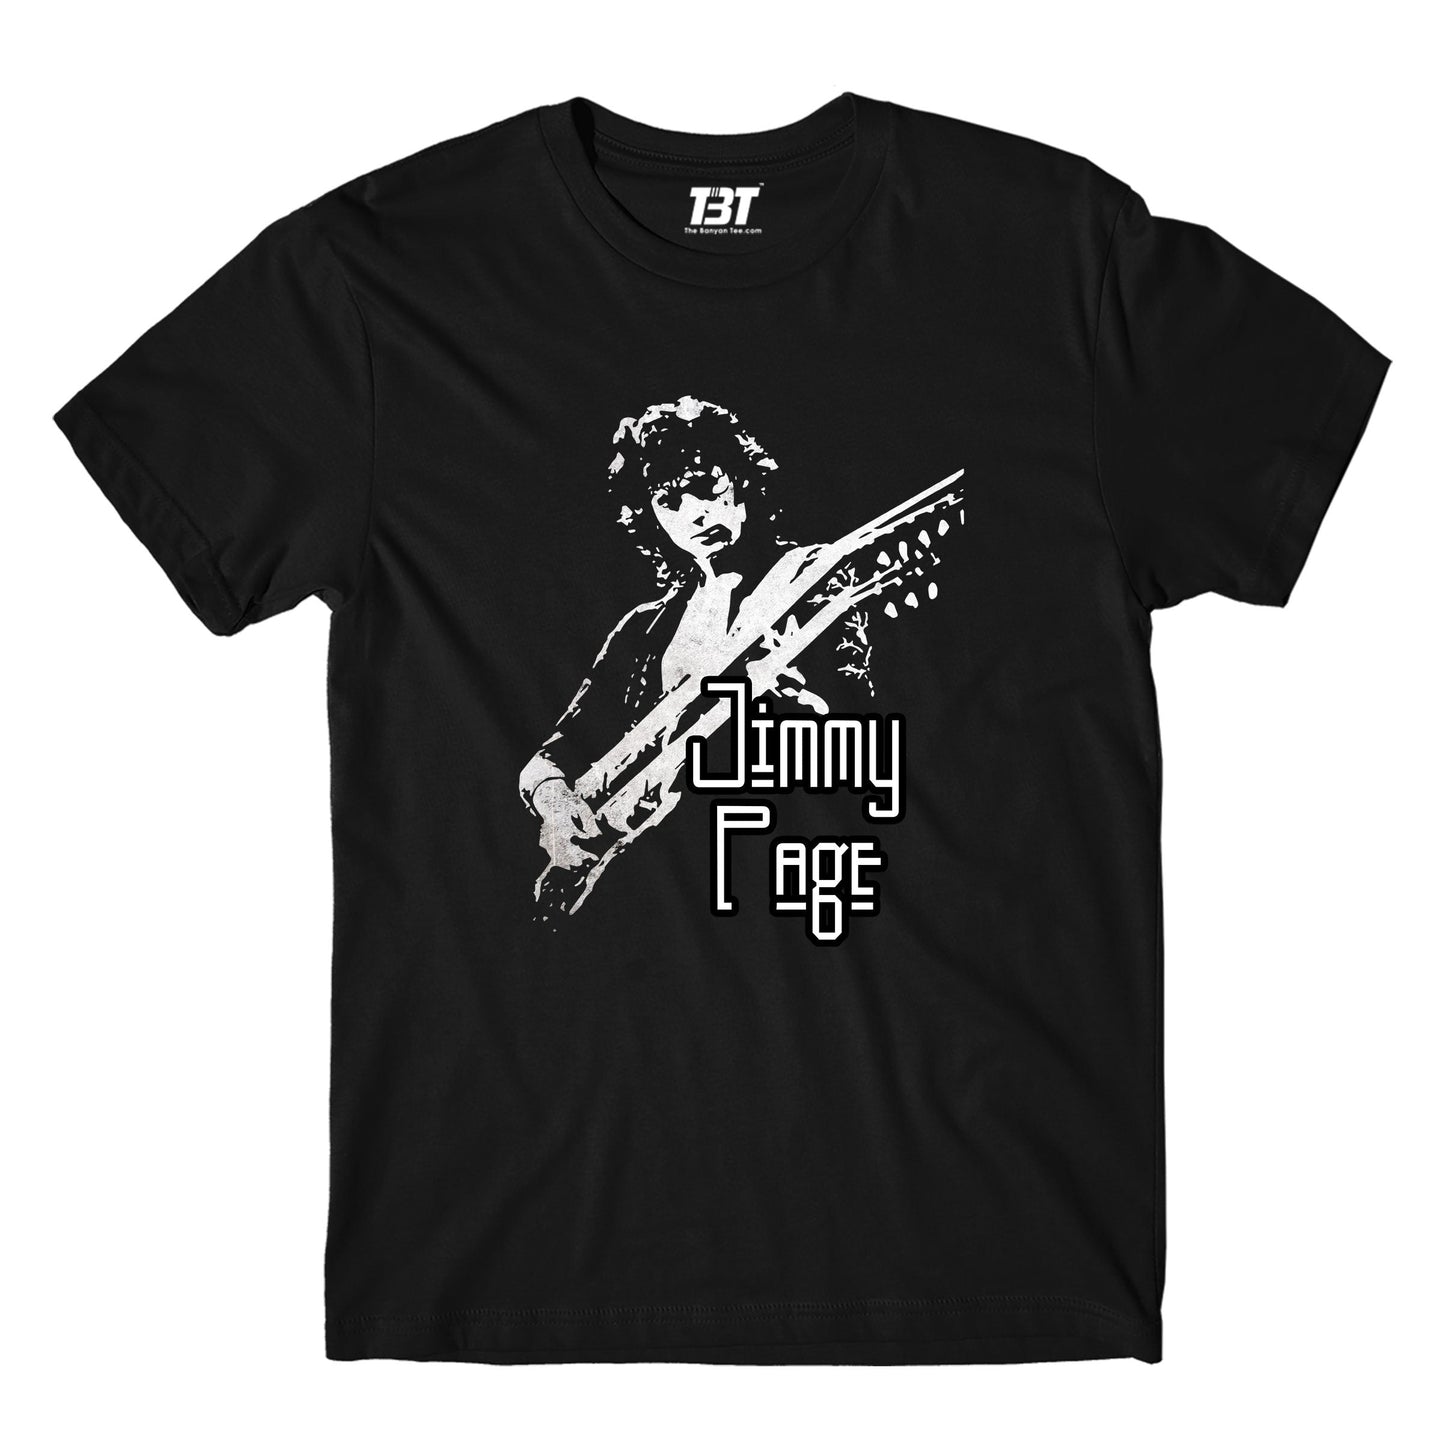 the banyan tee merch on sale Jimmy Page T shirt - On Sale - XS (Chest size 36 IN)